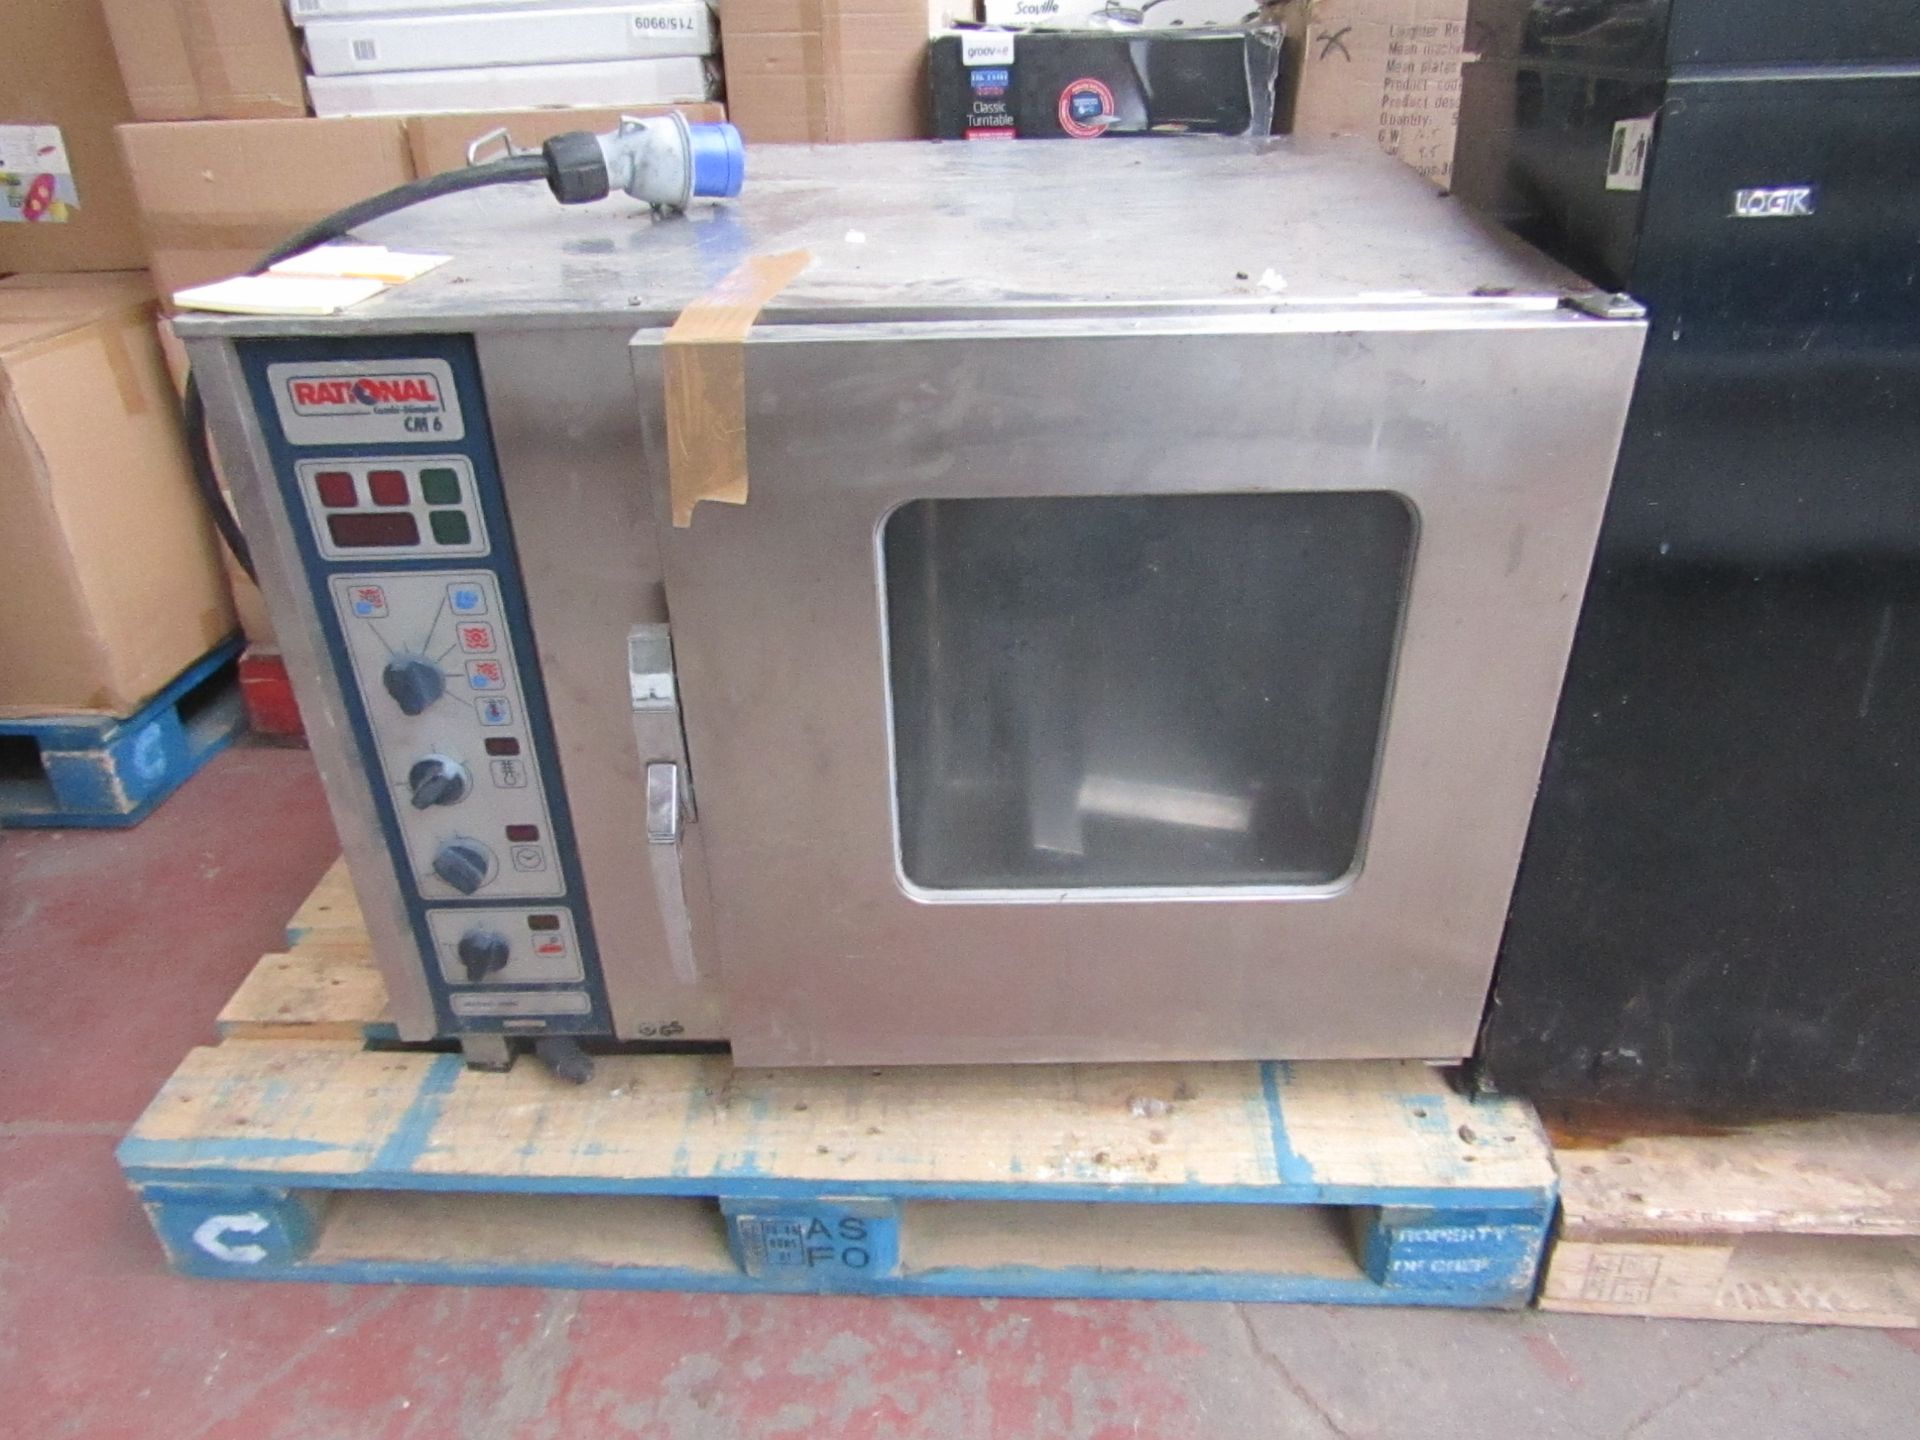 Rational Combi master electric Industrial oven,in used condition,needs a clean,vendor suggests it